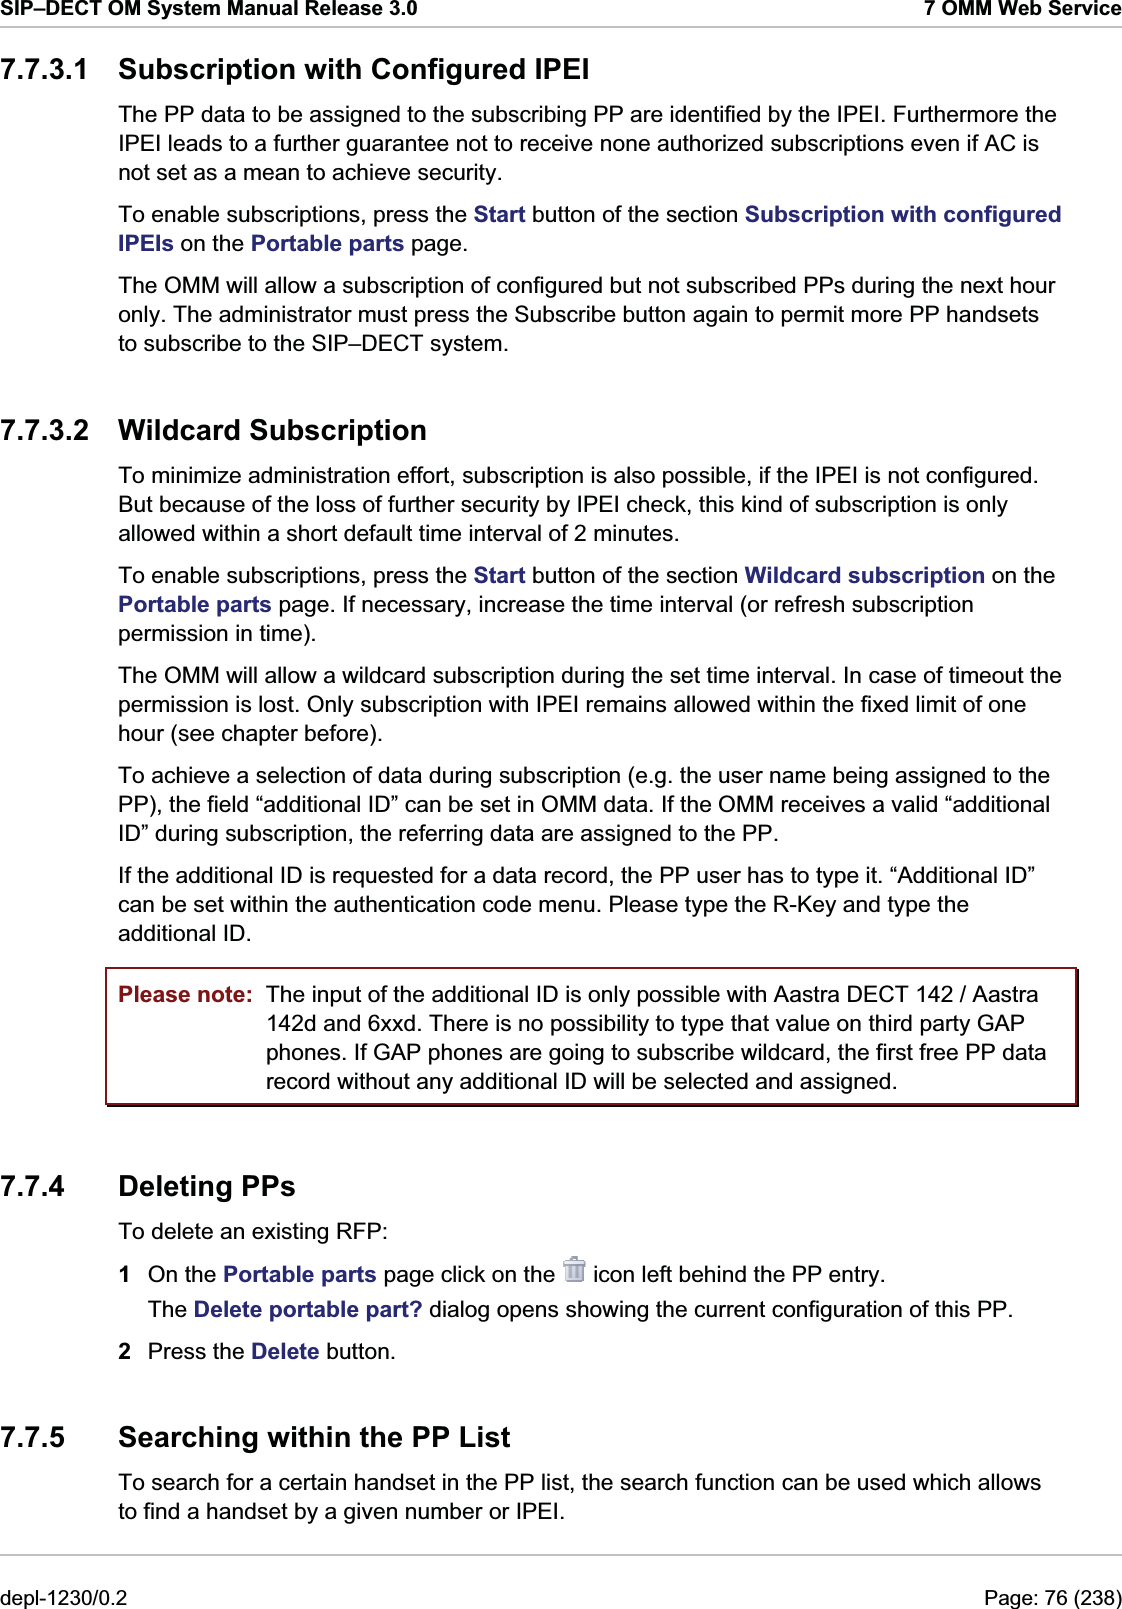 SIP–DECT OM System Manual Release 3.0  7 OMM Web Service 7.7.3.1  Subscription with Configured IPEI The PP data to be assigned to the subscribing PP are identified by the IPEI. Furthermore the IPEI leads to a further guarantee not to receive none authorized subscriptions even if AC is not set as a mean to achieve security.  To enable subscriptions, press the Start button of the section Subscription with configured IPEIs on the Portable parts page.  The OMM will allow a subscription of configured but not subscribed PPs during the next hour only. The administrator must press the Subscribe button again to permit more PP handsets to subscribe to the SIP–DECT system.  7.7.3.2 Wildcard Subscription To minimize administration effort, subscription is also possible, if the IPEI is not configured. But because of the loss of further security by IPEI check, this kind of subscription is only allowed within a short default time interval of 2 minutes. To enable subscriptions, press the Start button of the section Wildcard subscription on the Portable parts page. If necessary, increase the time interval (or refresh subscription permission in time).  The OMM will allow a wildcard subscription during the set time interval. In case of timeout the permission is lost. Only subscription with IPEI remains allowed within the fixed limit of one hour (see chapter before).  To achieve a selection of data during subscription (e.g. the user name being assigned to the PP), the field “additional ID” can be set in OMM data. If the OMM receives a valid “additional ID” during subscription, the referring data are assigned to the PP.  If the additional ID is requested for a data record, the PP user has to type it. “Additional ID” can be set within the authentication code menu. Please type the R-Key and type the additional ID. Please note:  The input of the additional ID is only possible with Aastra DECT 142 / Aastra 142d and 6xxd. There is no possibility to type that value on third party GAP phones. If GAP phones are going to subscribe wildcard, the first free PP data record without any additional ID will be selected and assigned. 7.7.4 Deleting PPs To delete an existing RFP:  1  On the Portable parts page click on the   icon left behind the PP entry. The Delete portable part? dialog opens showing the current configuration of this PP. 2  Press the Delete button. 7.7.5  Searching within the PP List To search for a certain handset in the PP list, the search function can be used which allows to find a handset by a given number or IPEI.  depl-1230/0.2  Page: 76 (238) 